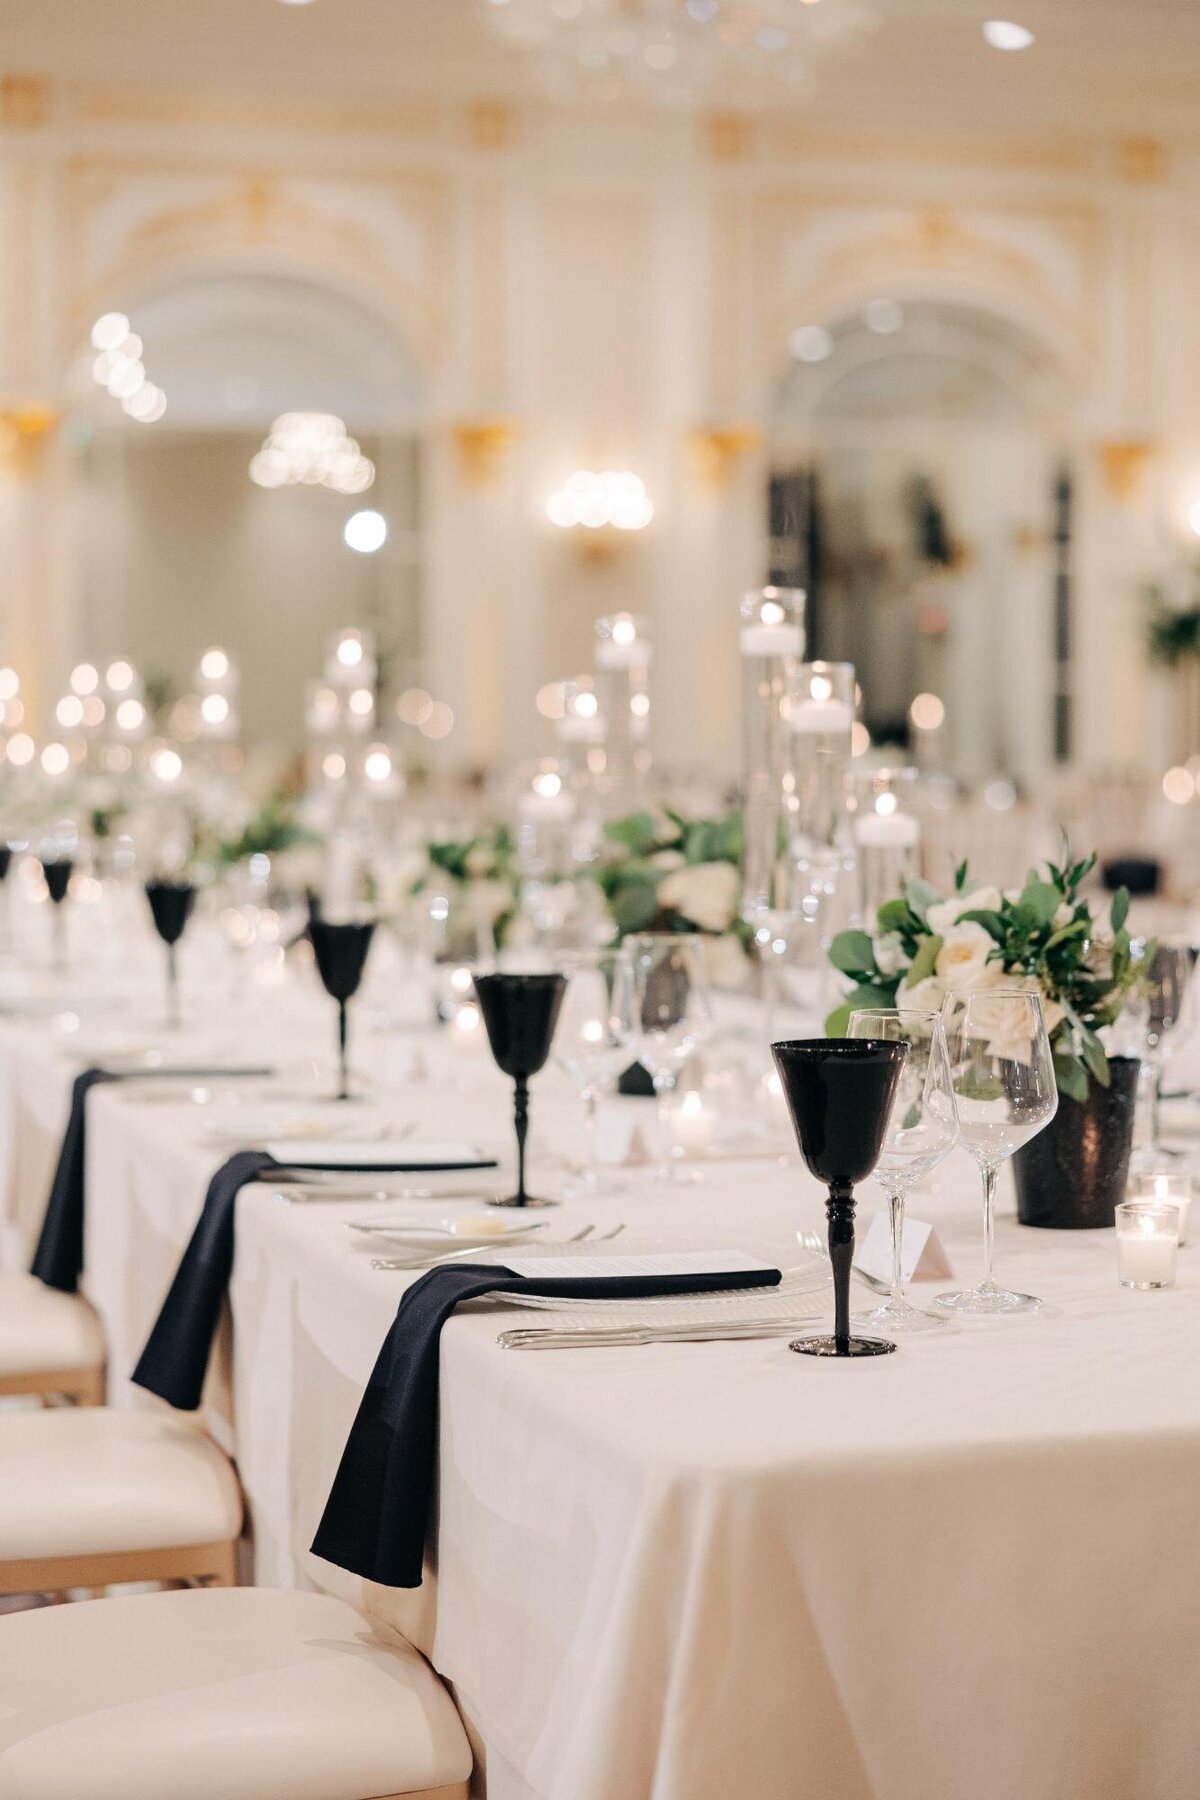 Elegant dining setup with white linens, black glassware, and floral centerpieces in a sophisticated ballroom.